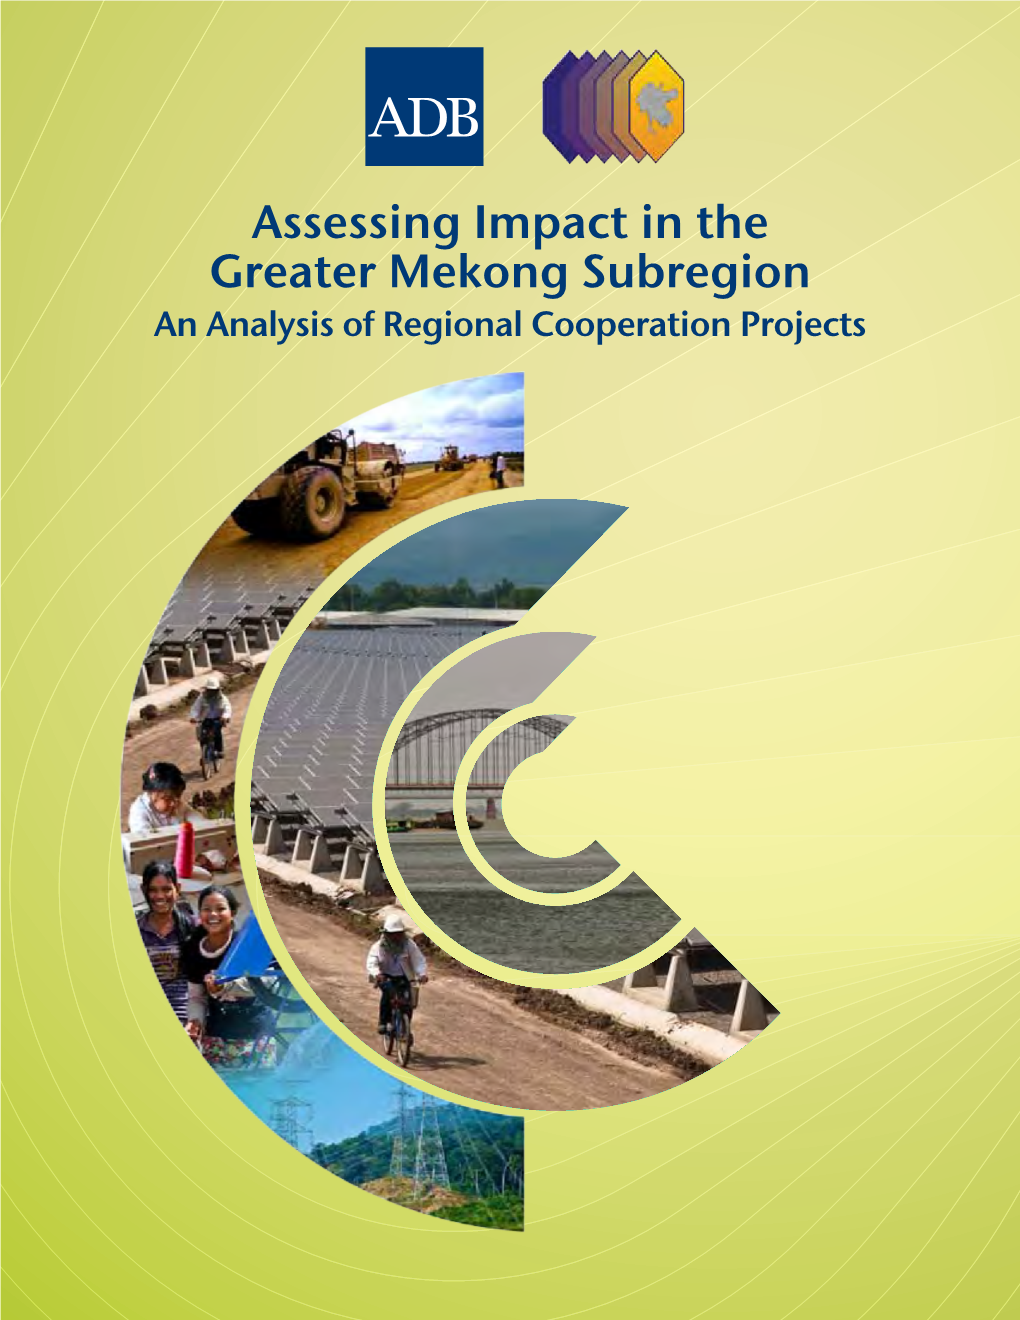 Assessing Impact in the Greater Mekong Subregion an Analysis of Regional Cooperation Projects